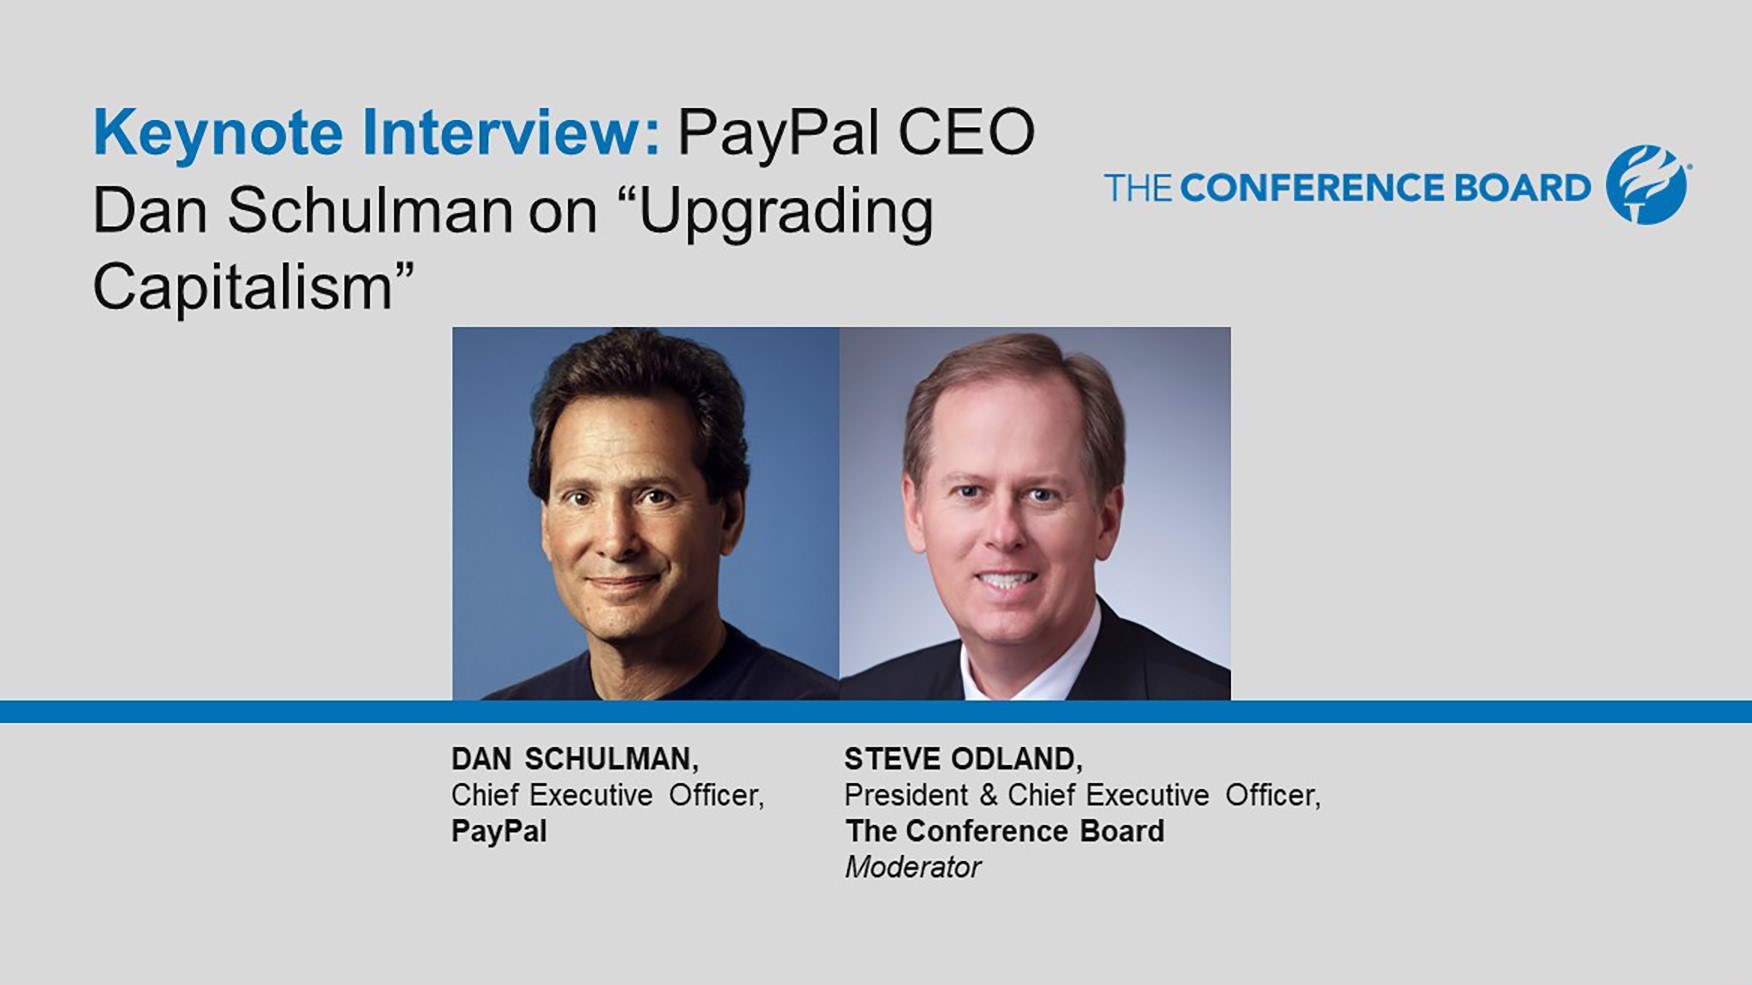 Building a More Civil & Just Society: Session E - Keynote Interview PayPal CEO Dan Schulman on Upgrading Capitalism. 22 Mins